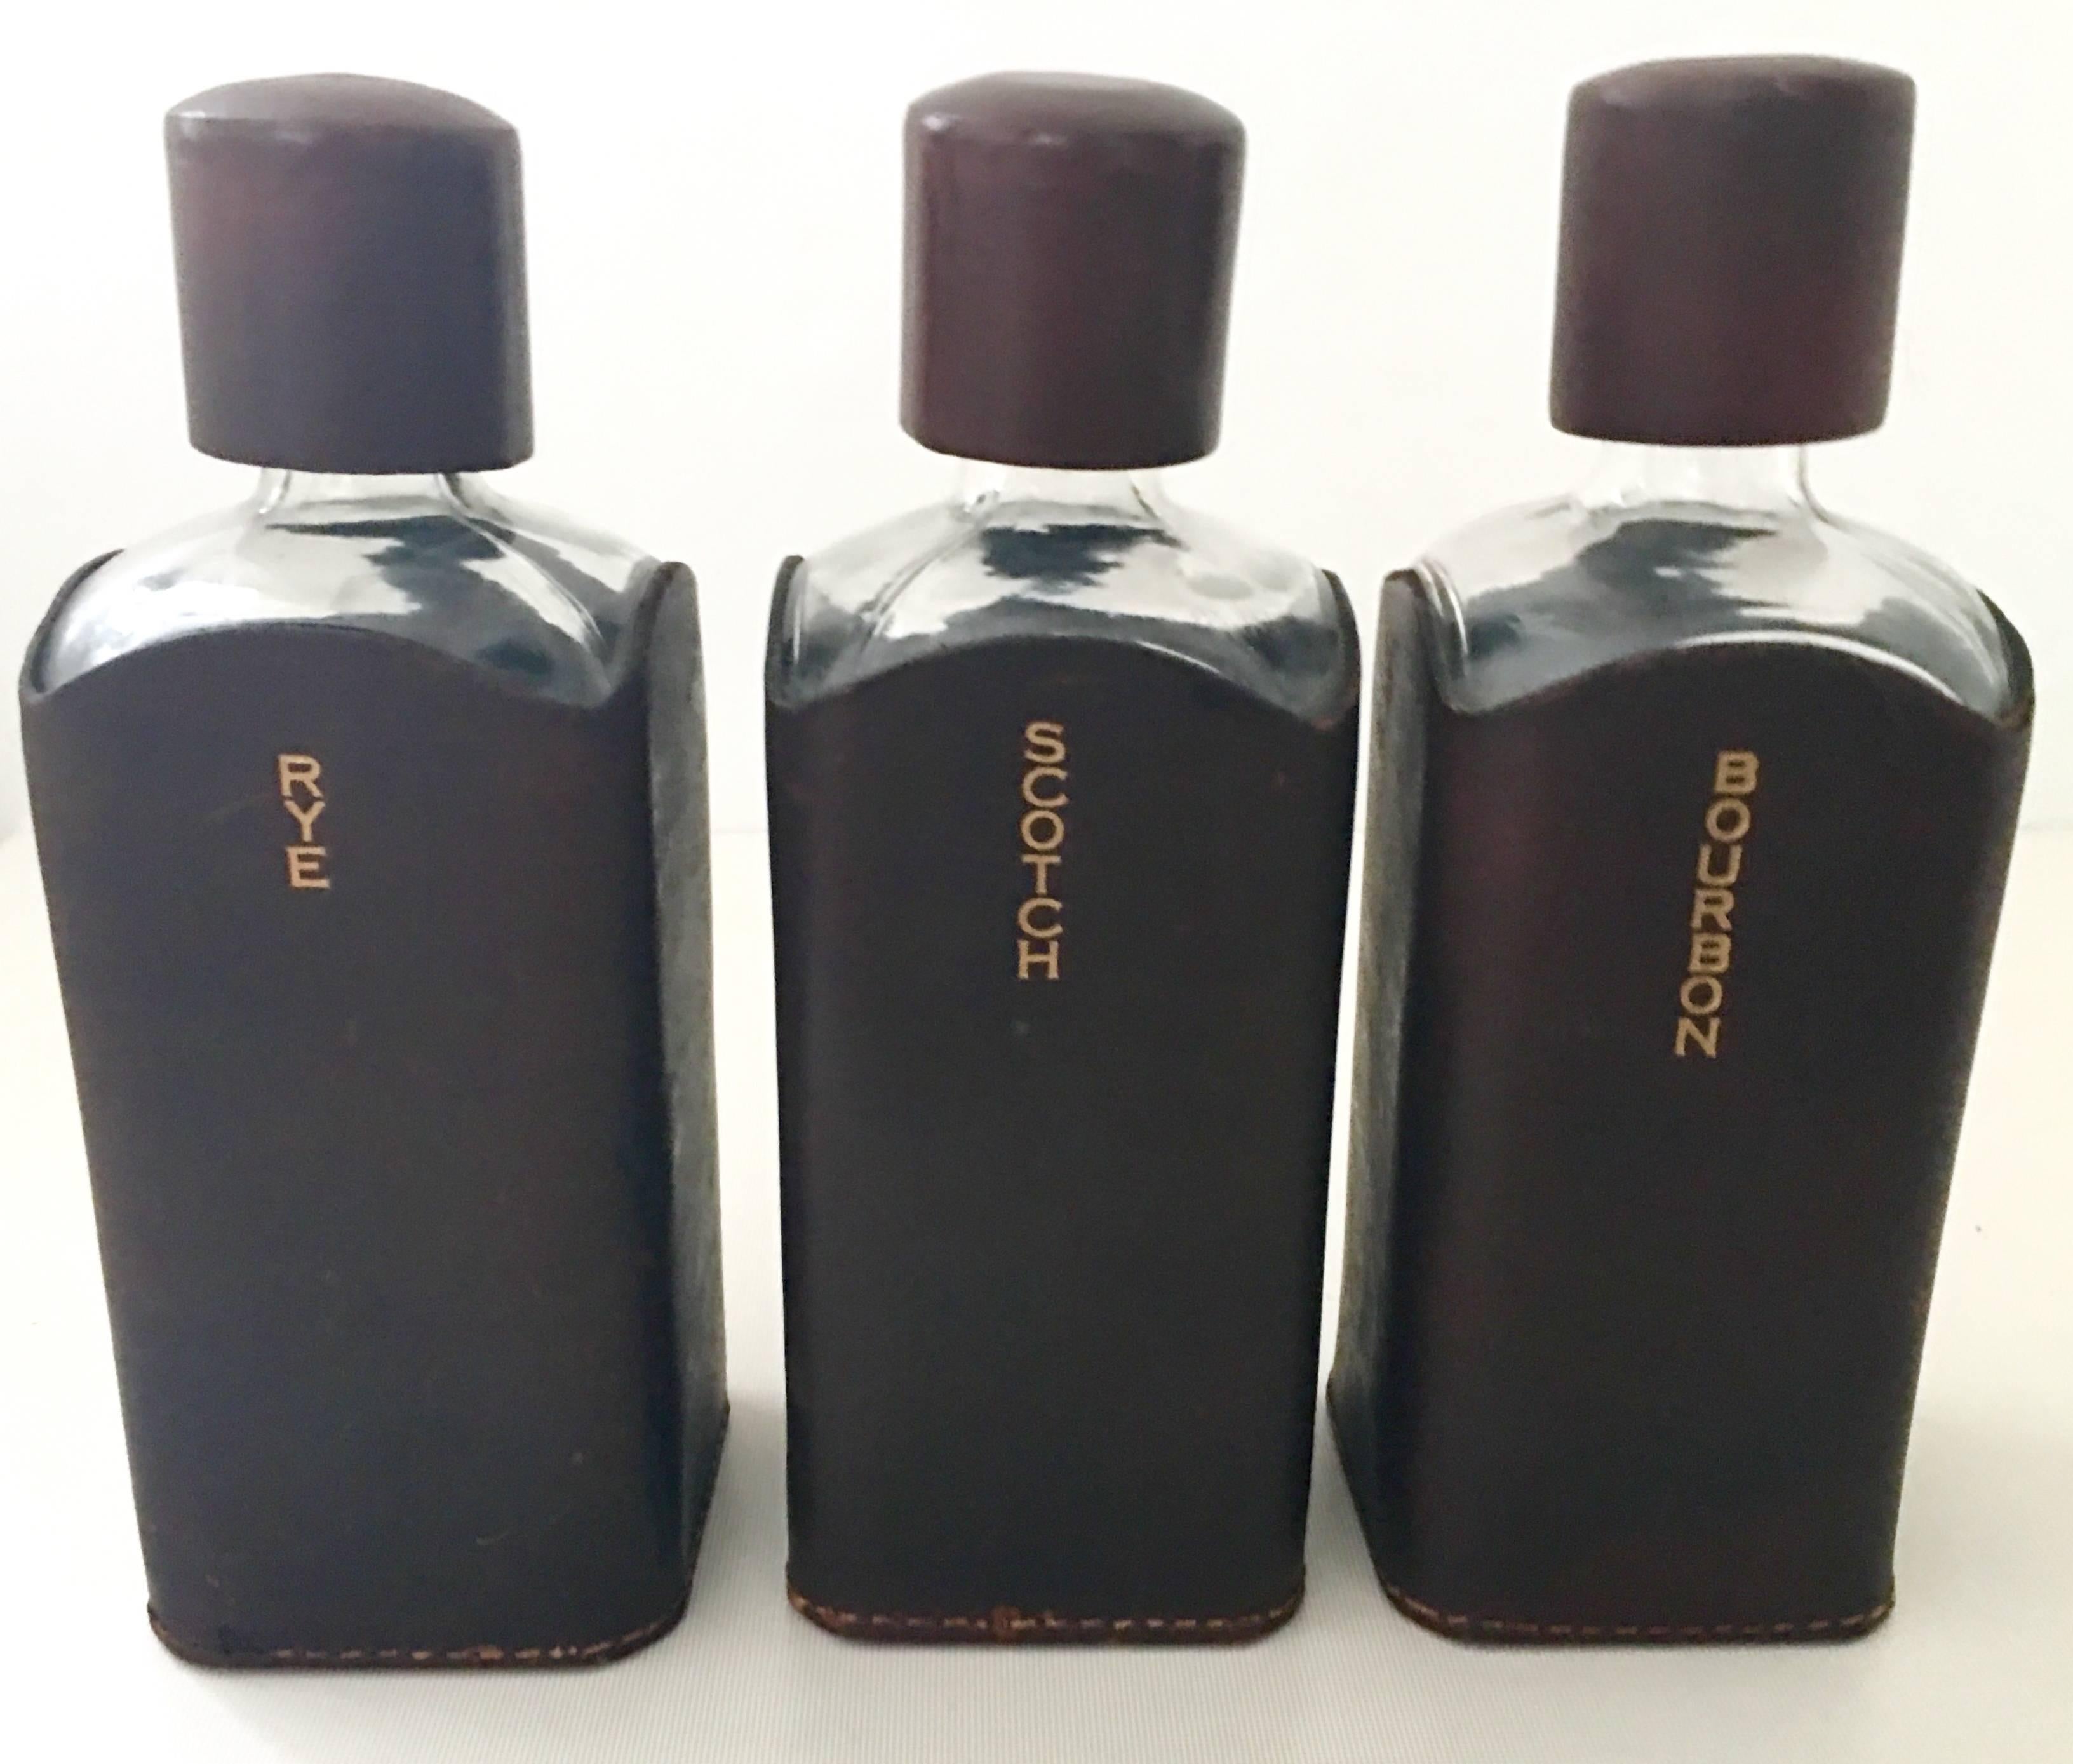 Mid-20th Century English set of three leather wrapped liquor bottles and carrying caddie by, Albro. This fantastic and complete travelling liquor bottle set features a gorgeous leather handled carrying caddie that perfectly fits three leather